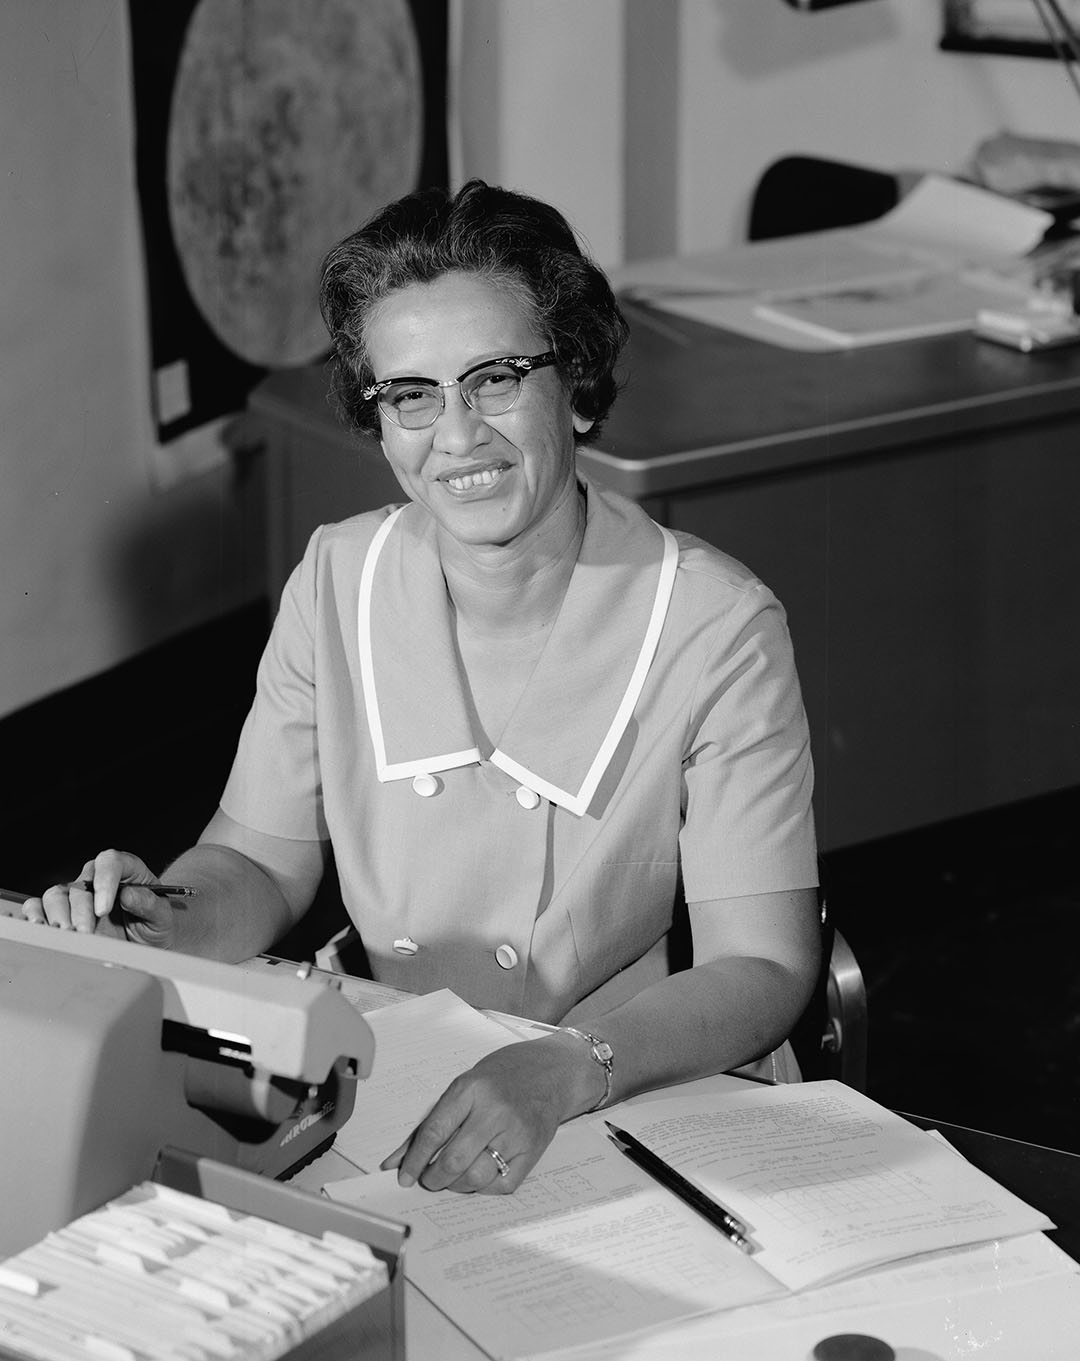 NASA research mathematician Katherine Johnson is photographed at her desk at Langley Research Center in 1966. Image credit: NASA